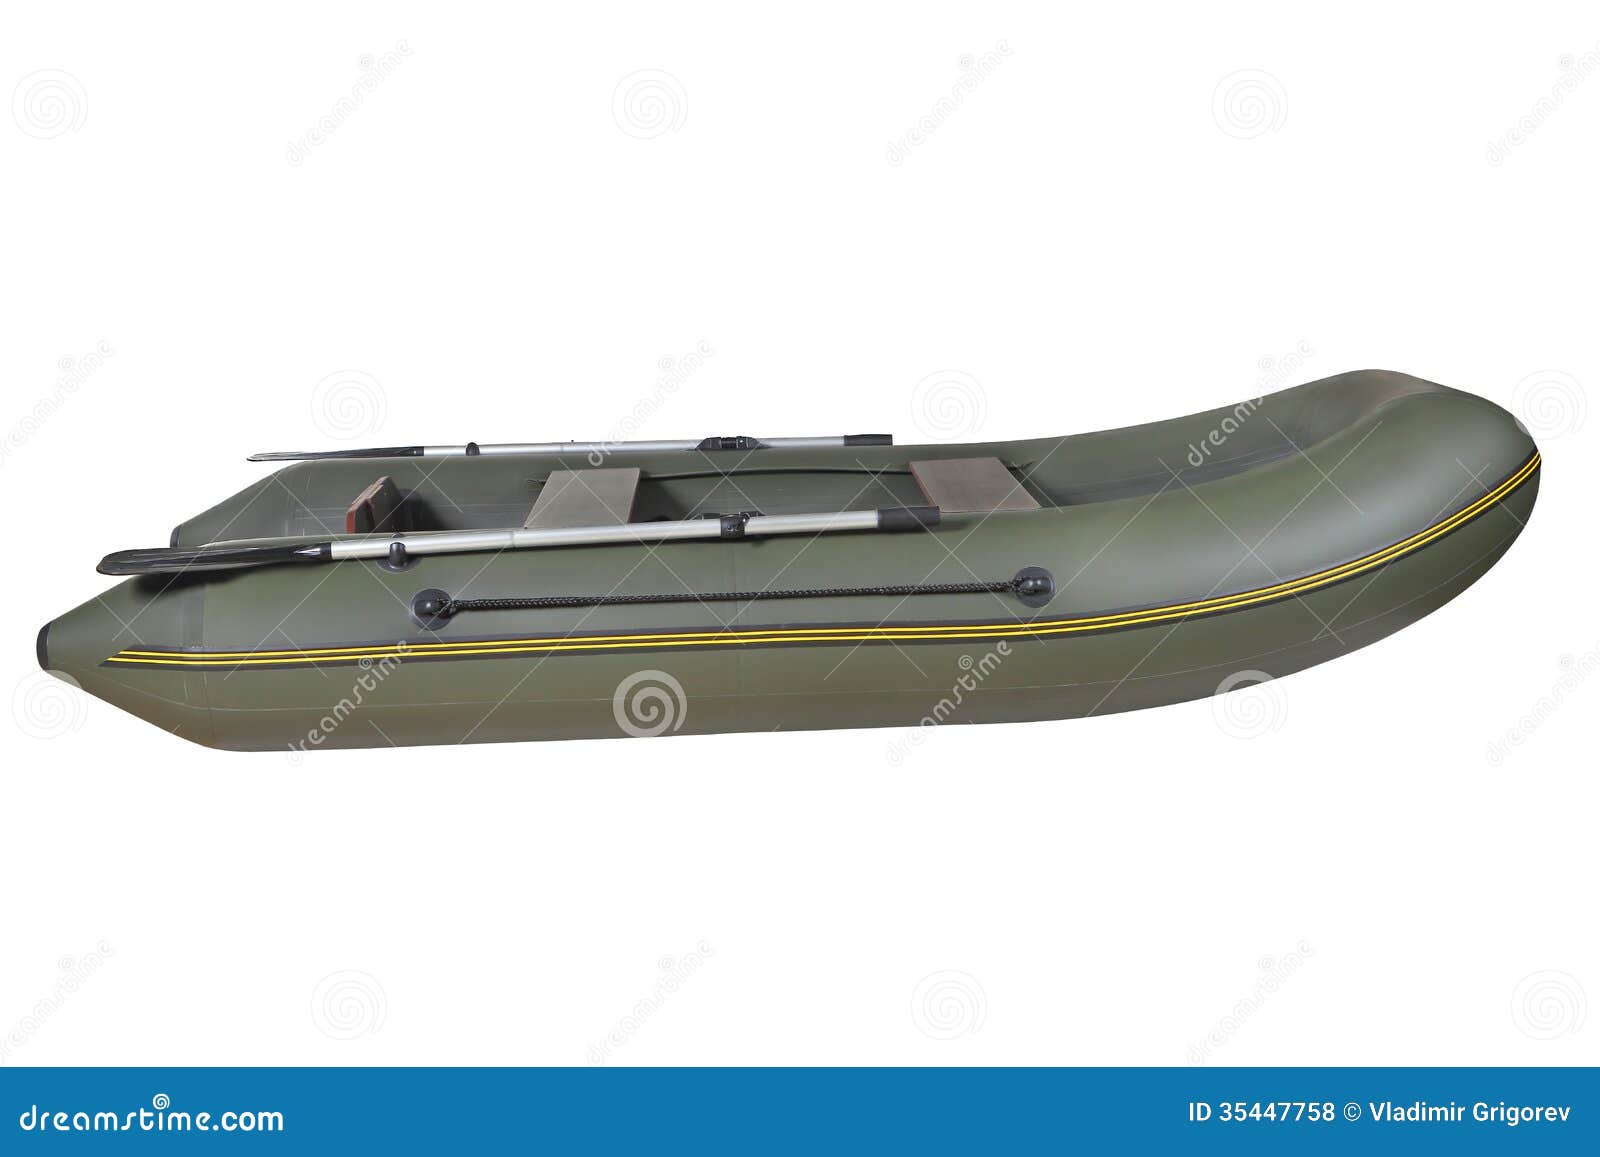 https://thumbs.dreamstime.com/z/green-rubber-inflatable-rowing-boat-isolated-white-backgro-color-complete-oars-image-background-pvc-fishing-35447758.jpg